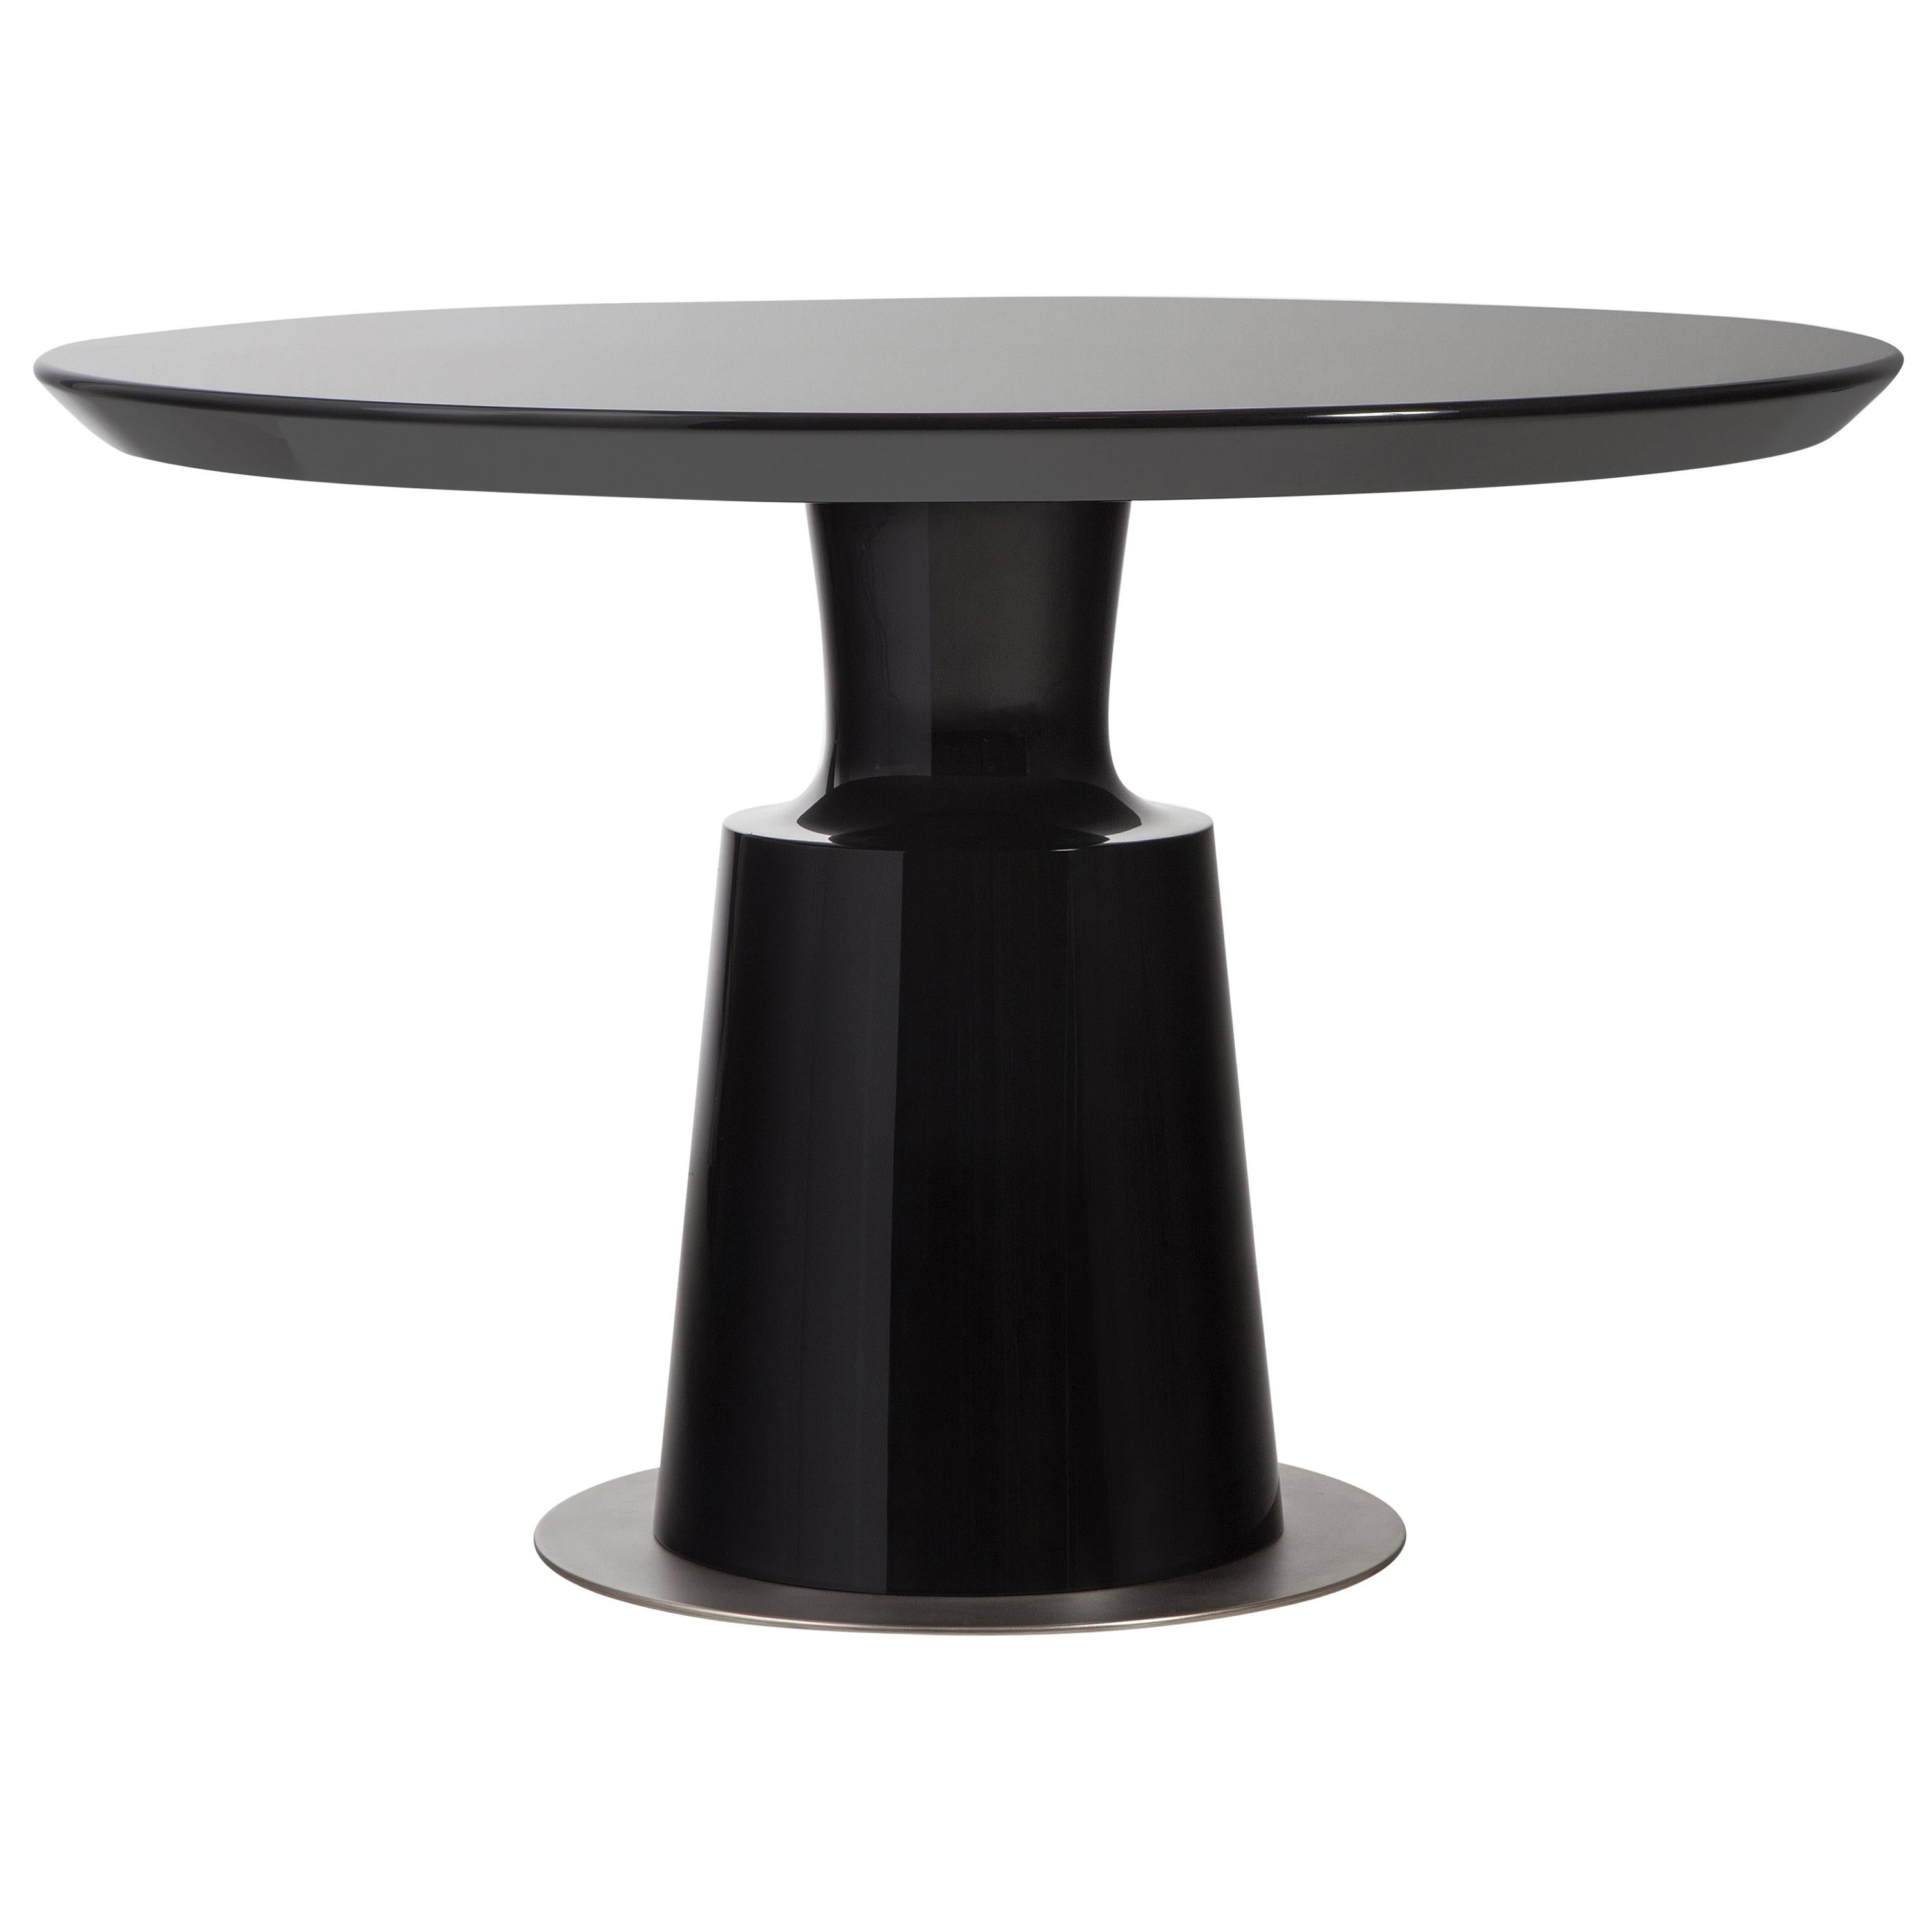 HOLLY HUNT Peso Round Dining Table in Black Lacquer with Aged Nickel Base Plate